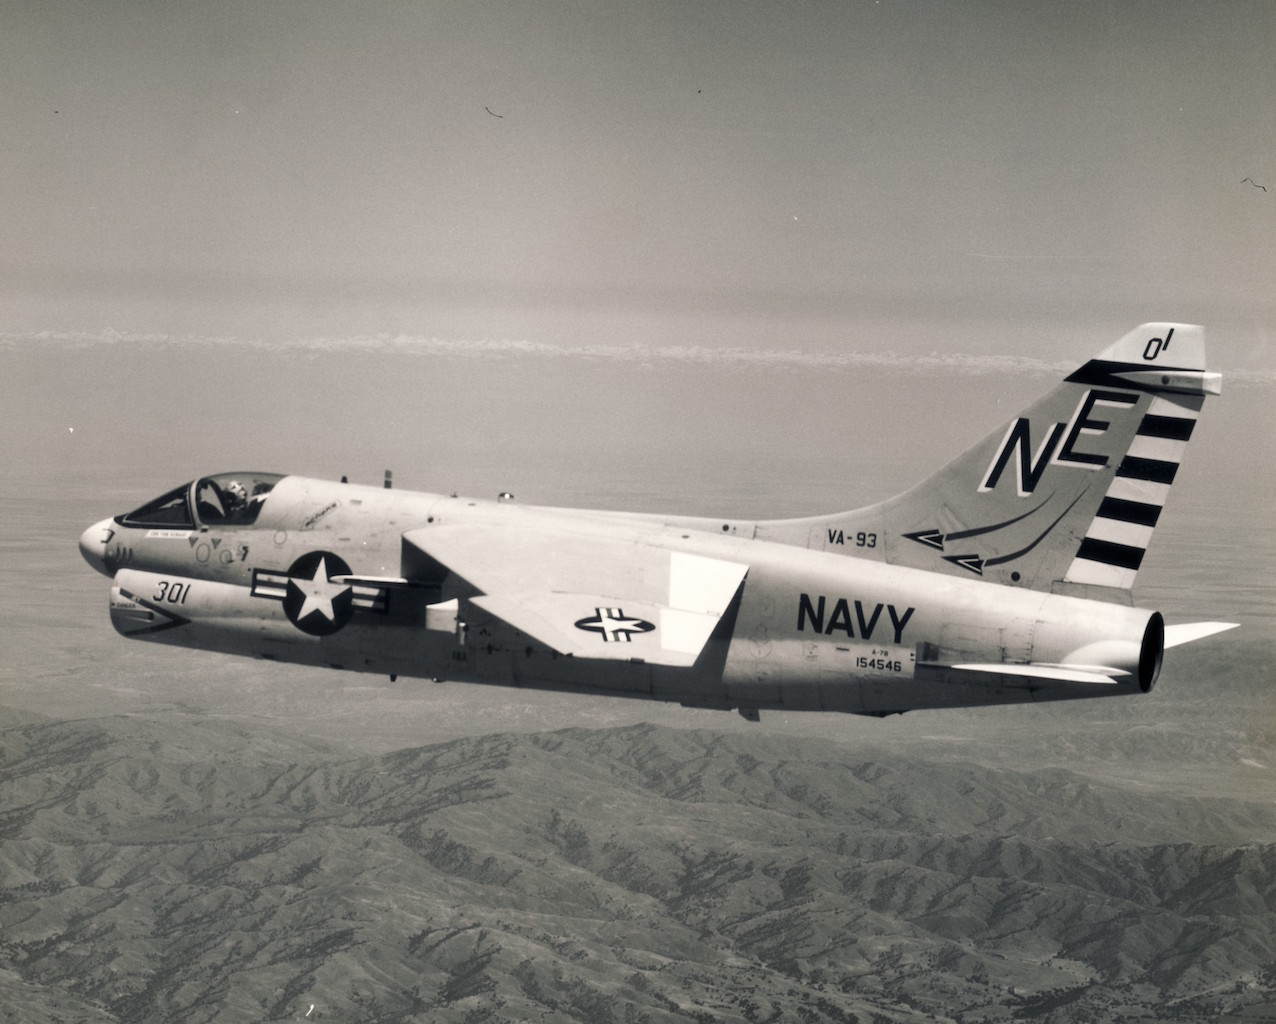 Vought A-7B of the VA-93 - May 15, 1969. Stephen Chapis Collection